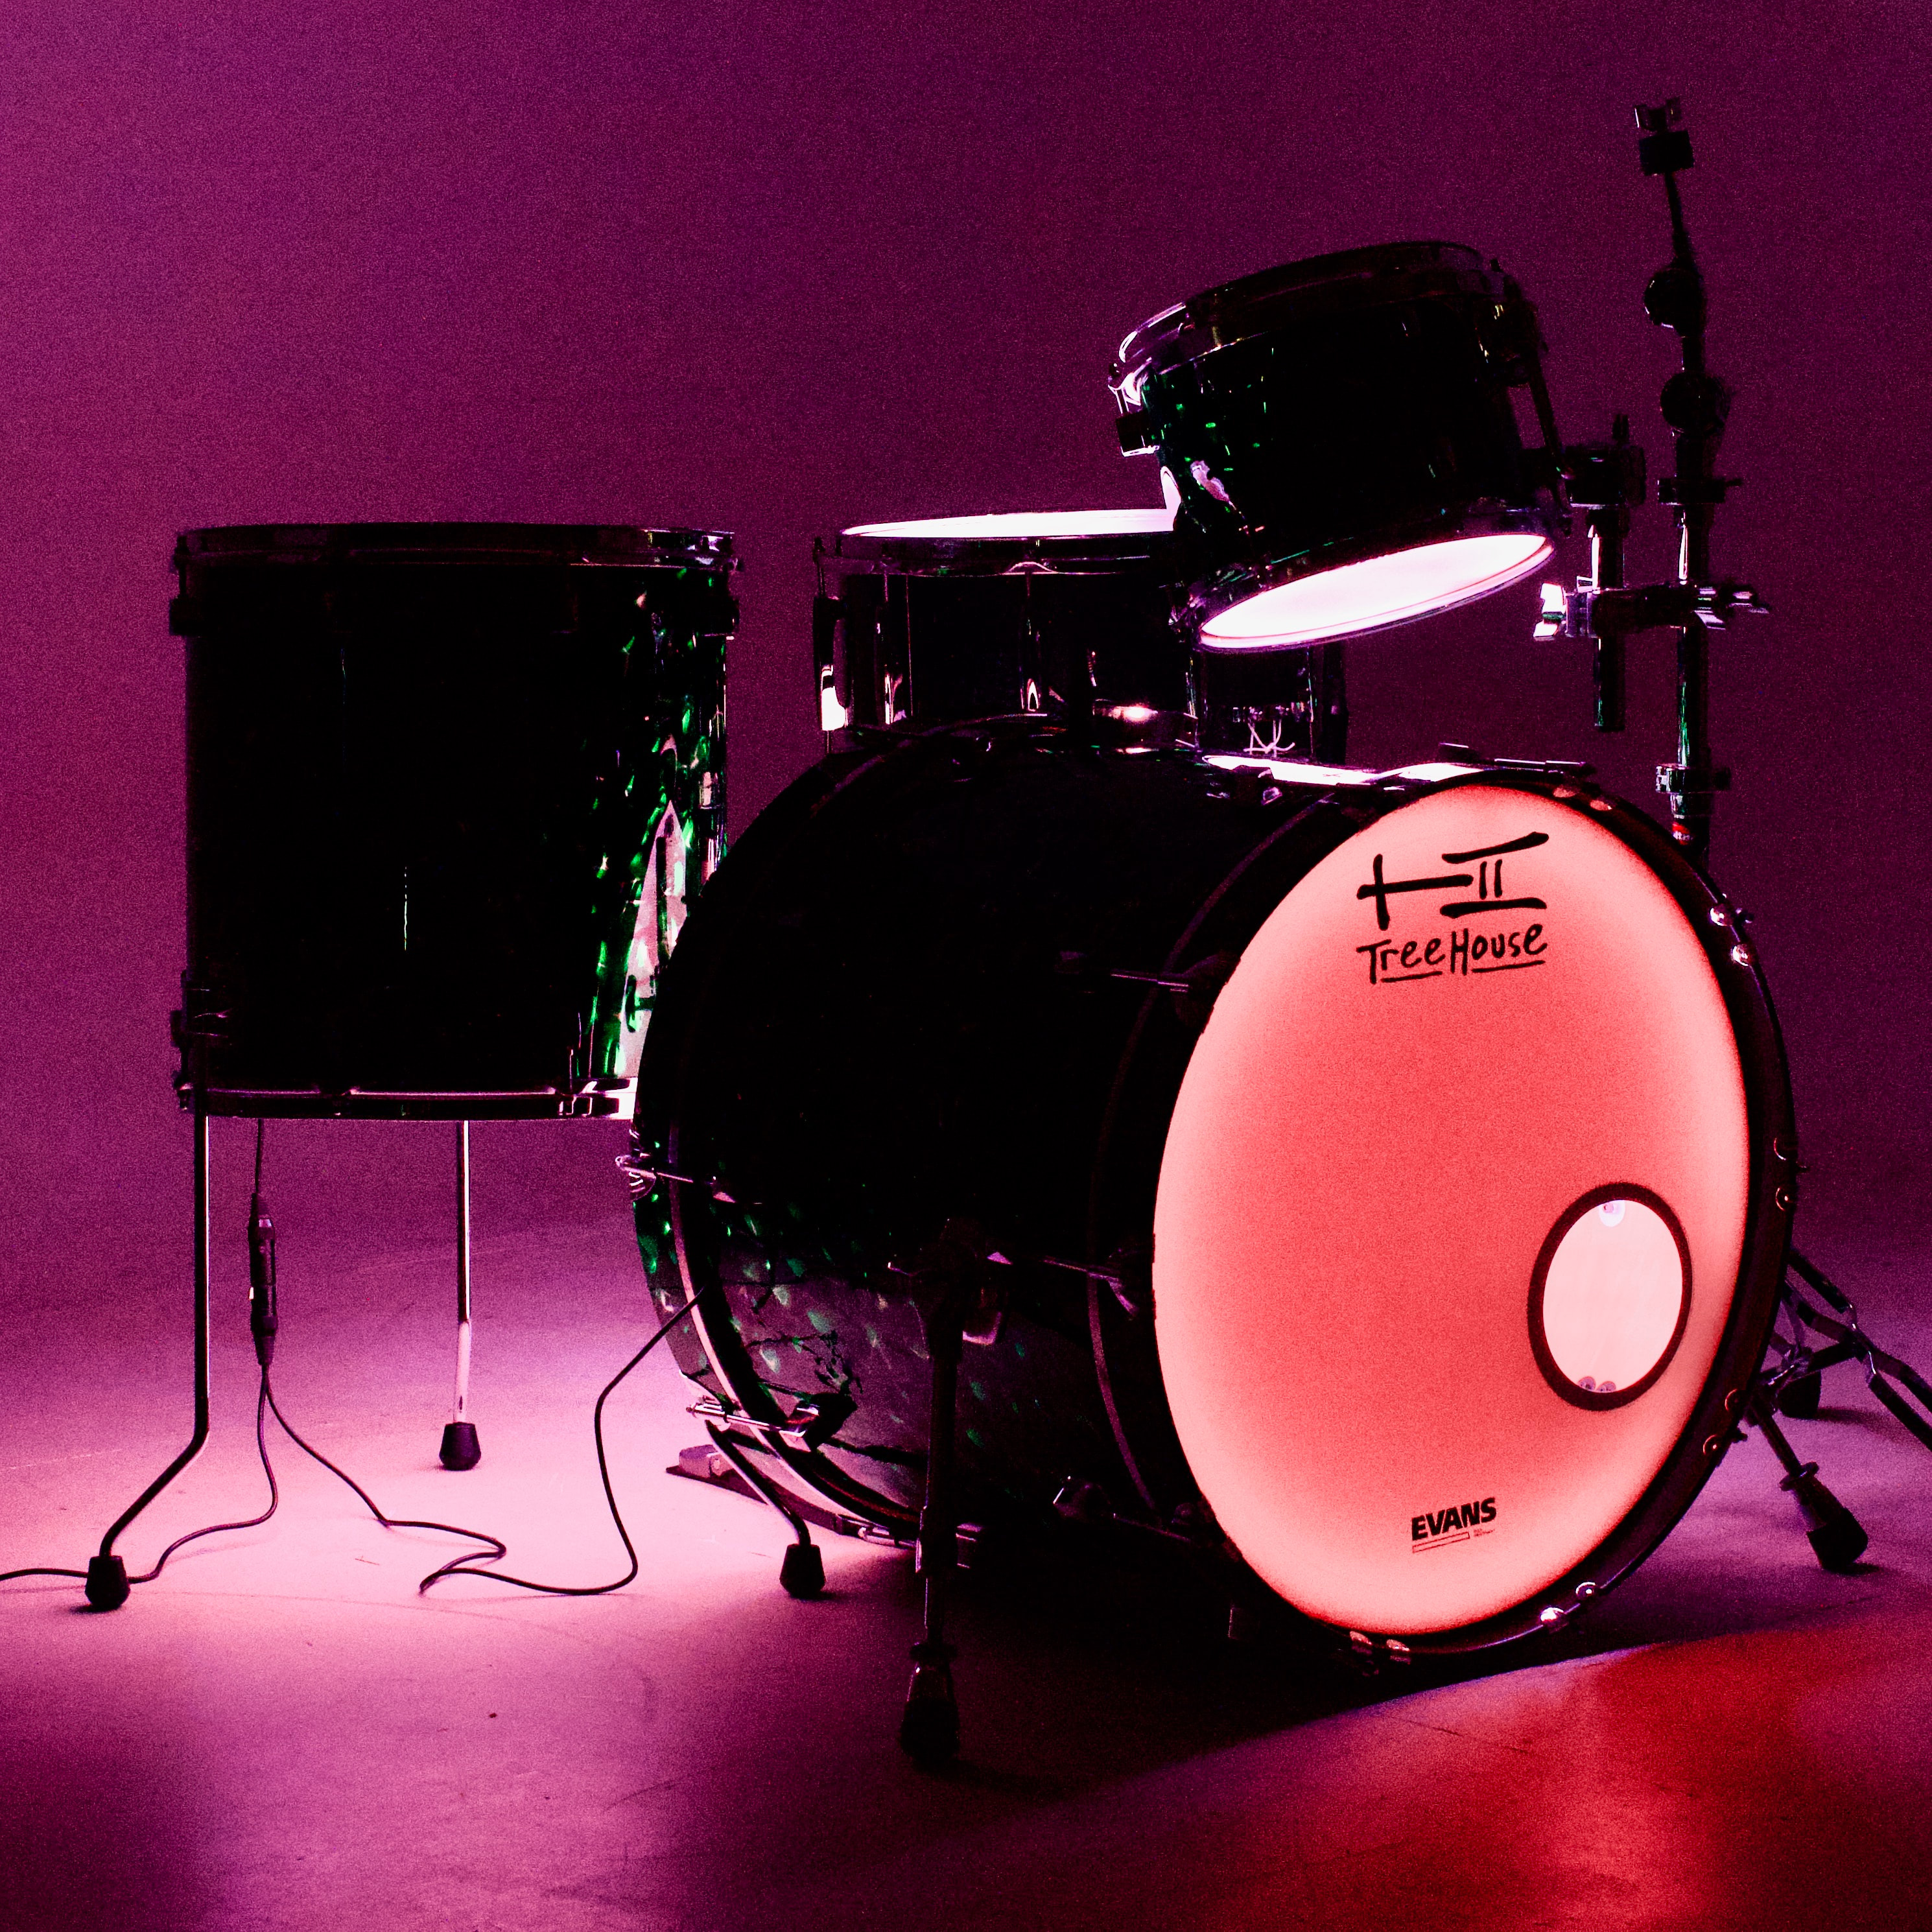 SALE正規品drumlite LED DRUMSET LIGHTING SYSTEM その他